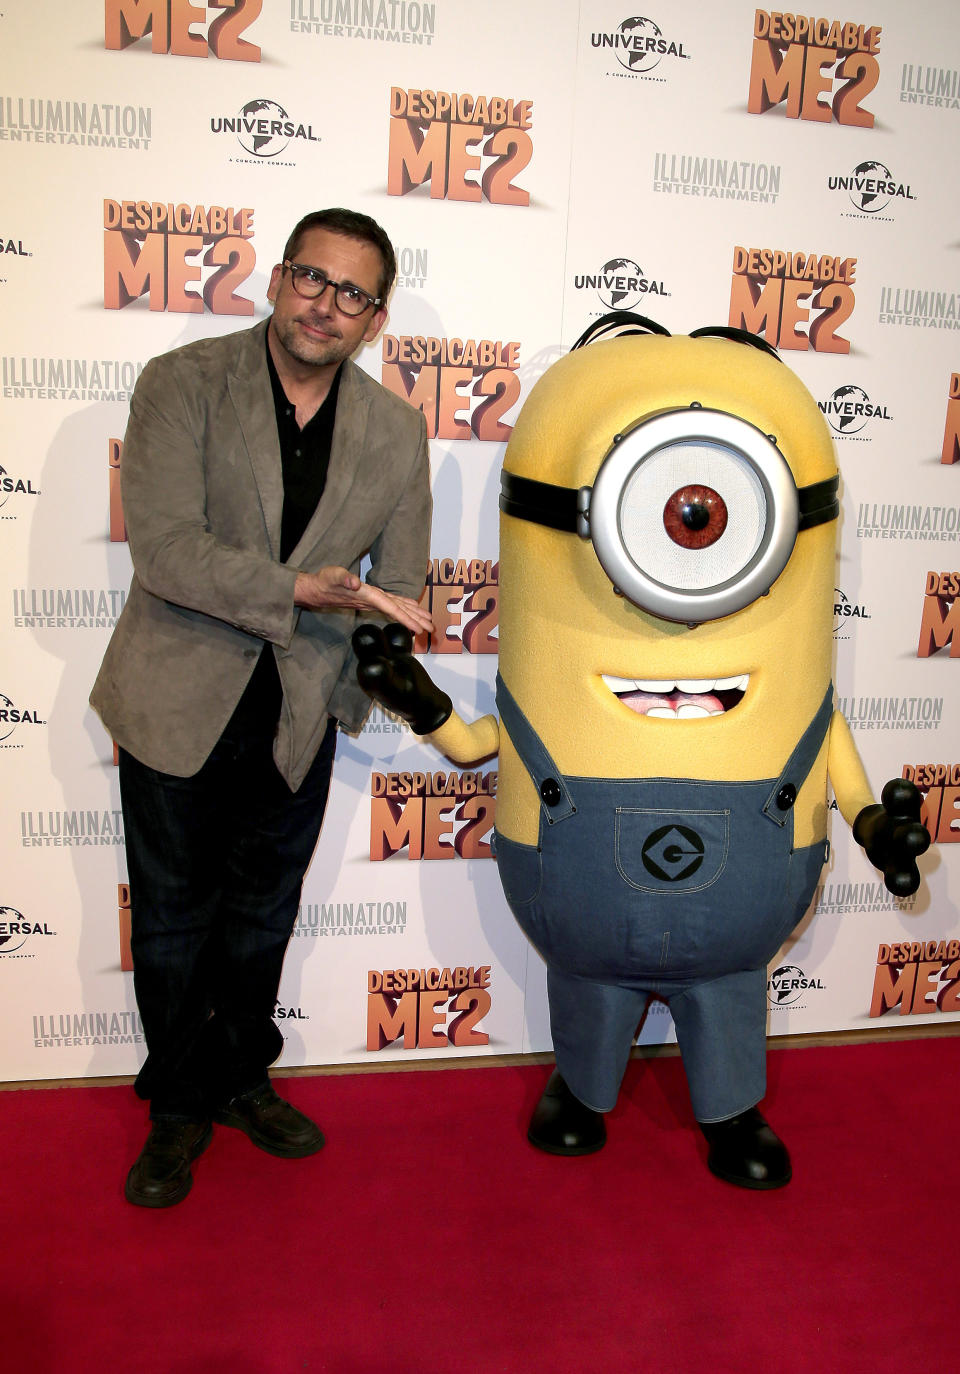 Actor Steve Carrell poses for photos with a character from "Despicable Me 2" as he walks the red carpet during the film's Australian premiere in Sydney, Australia, Wednesday, June 5, 2013. (AP Photo/Rob Griffith)